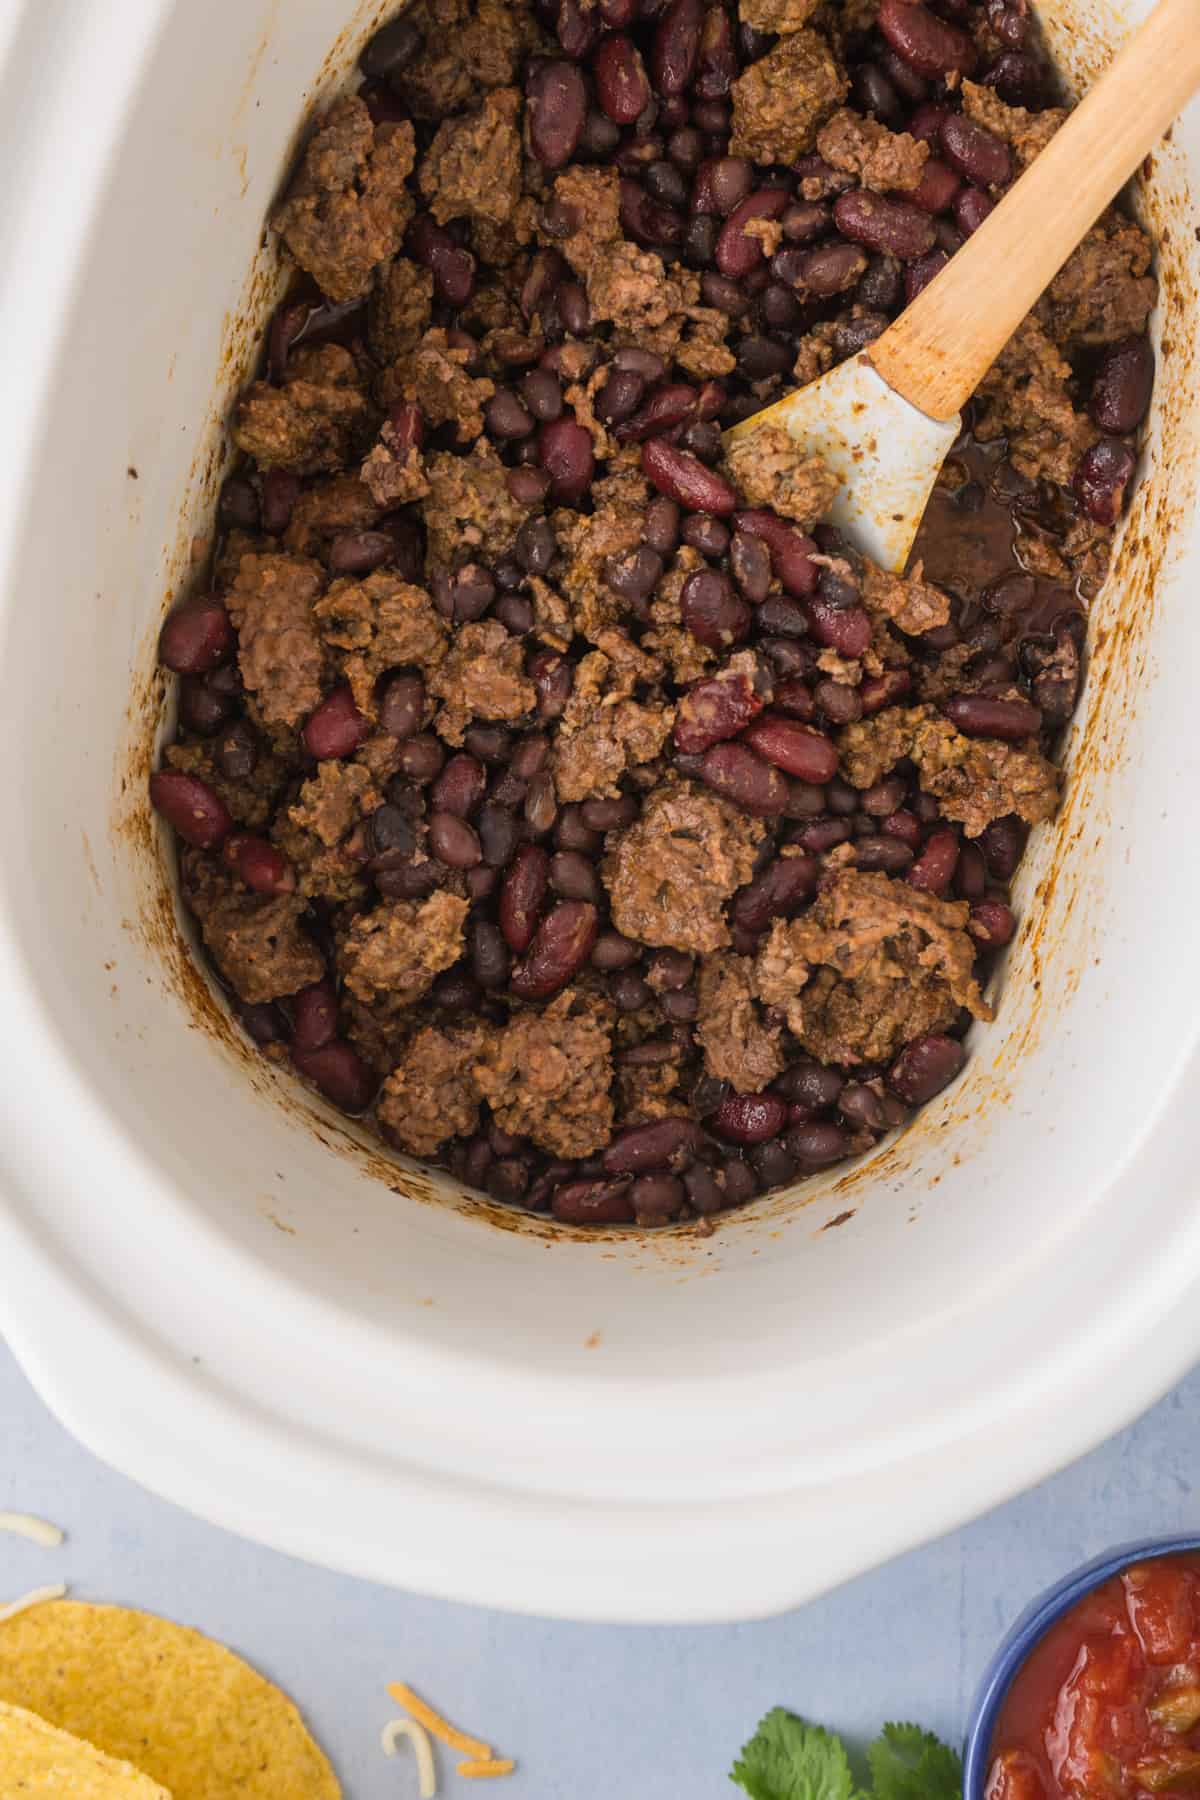 A crock pot full of meat and beans with a wooden spoon.